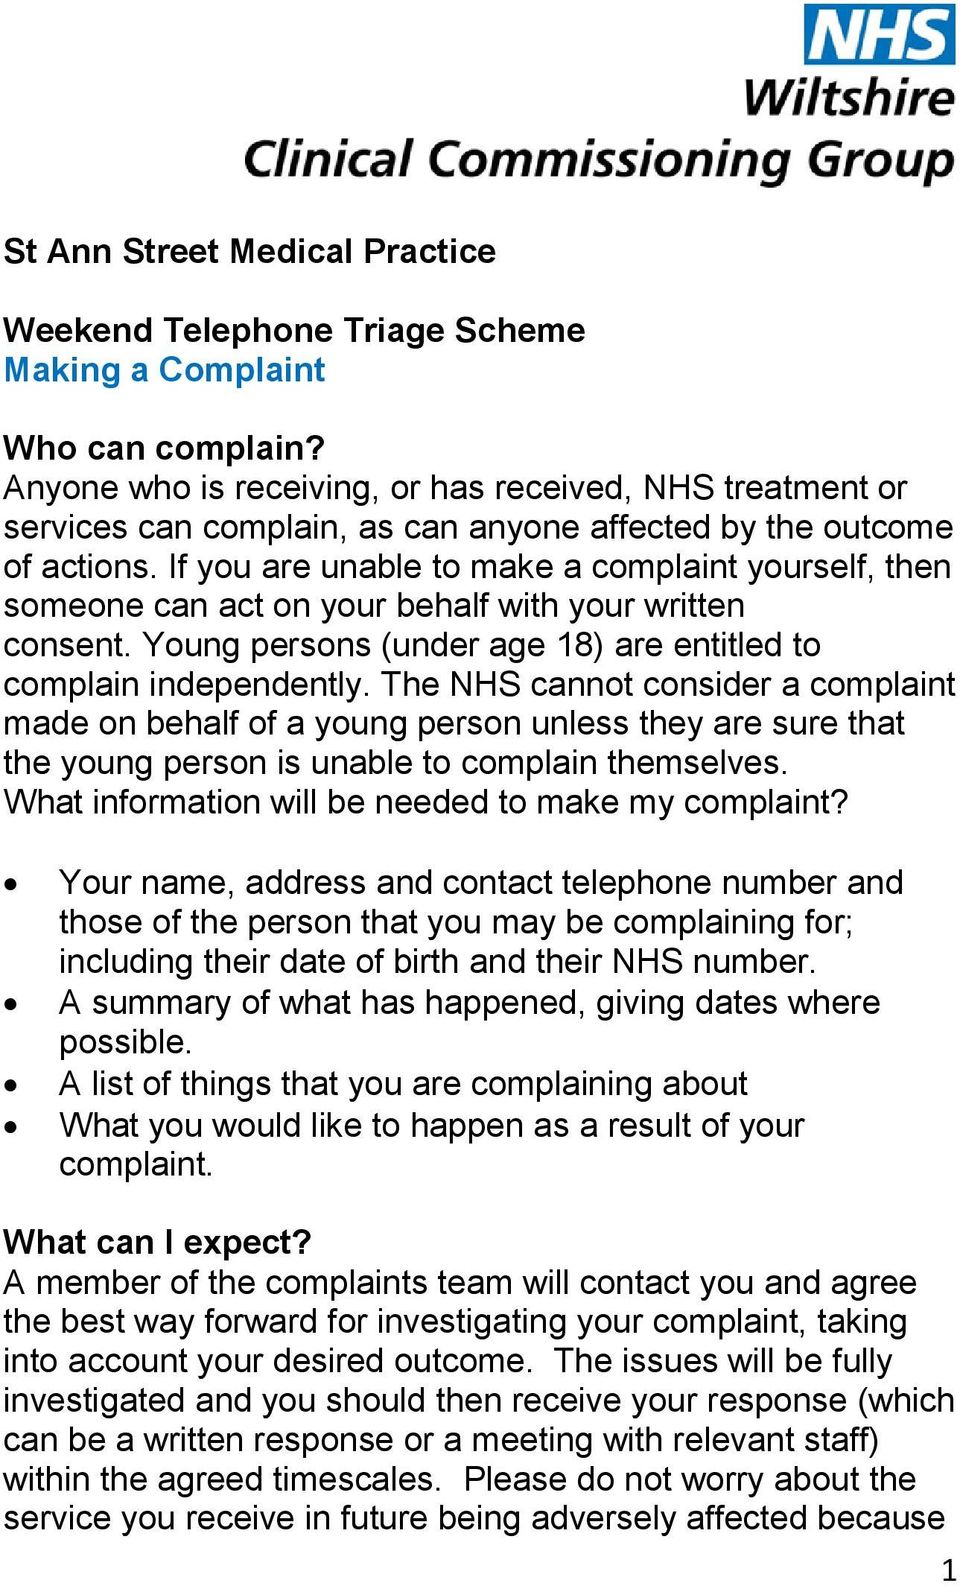 If you are unable to make a complaint yourself, then someone can act on your behalf with your written consent. Young persons (under age 18) are entitled to complain independently.